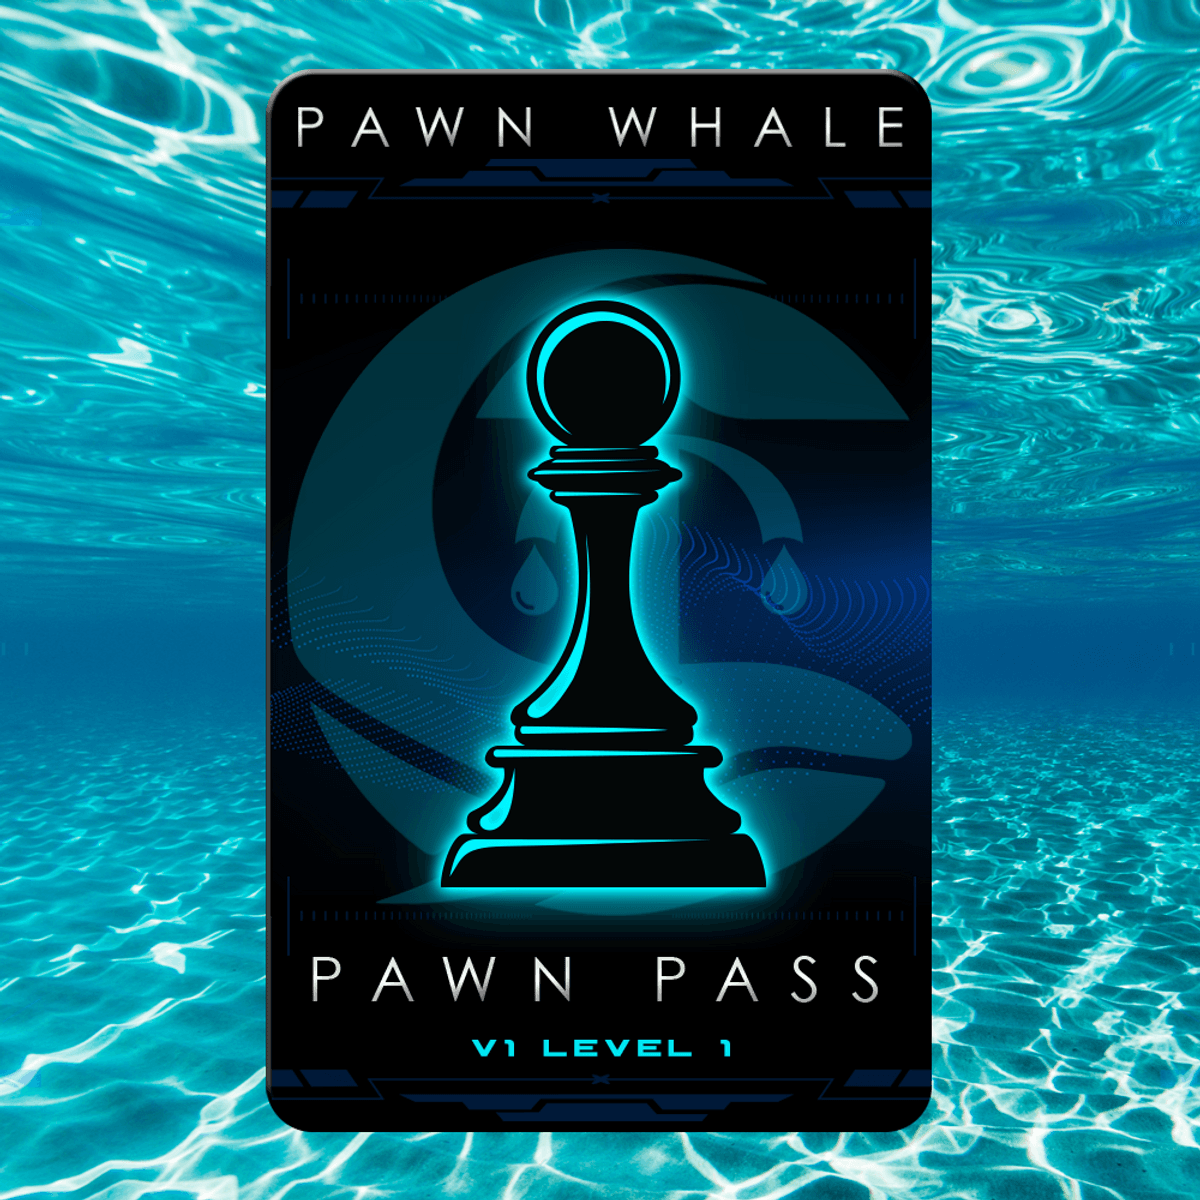 Pawn Whale Pass #2839